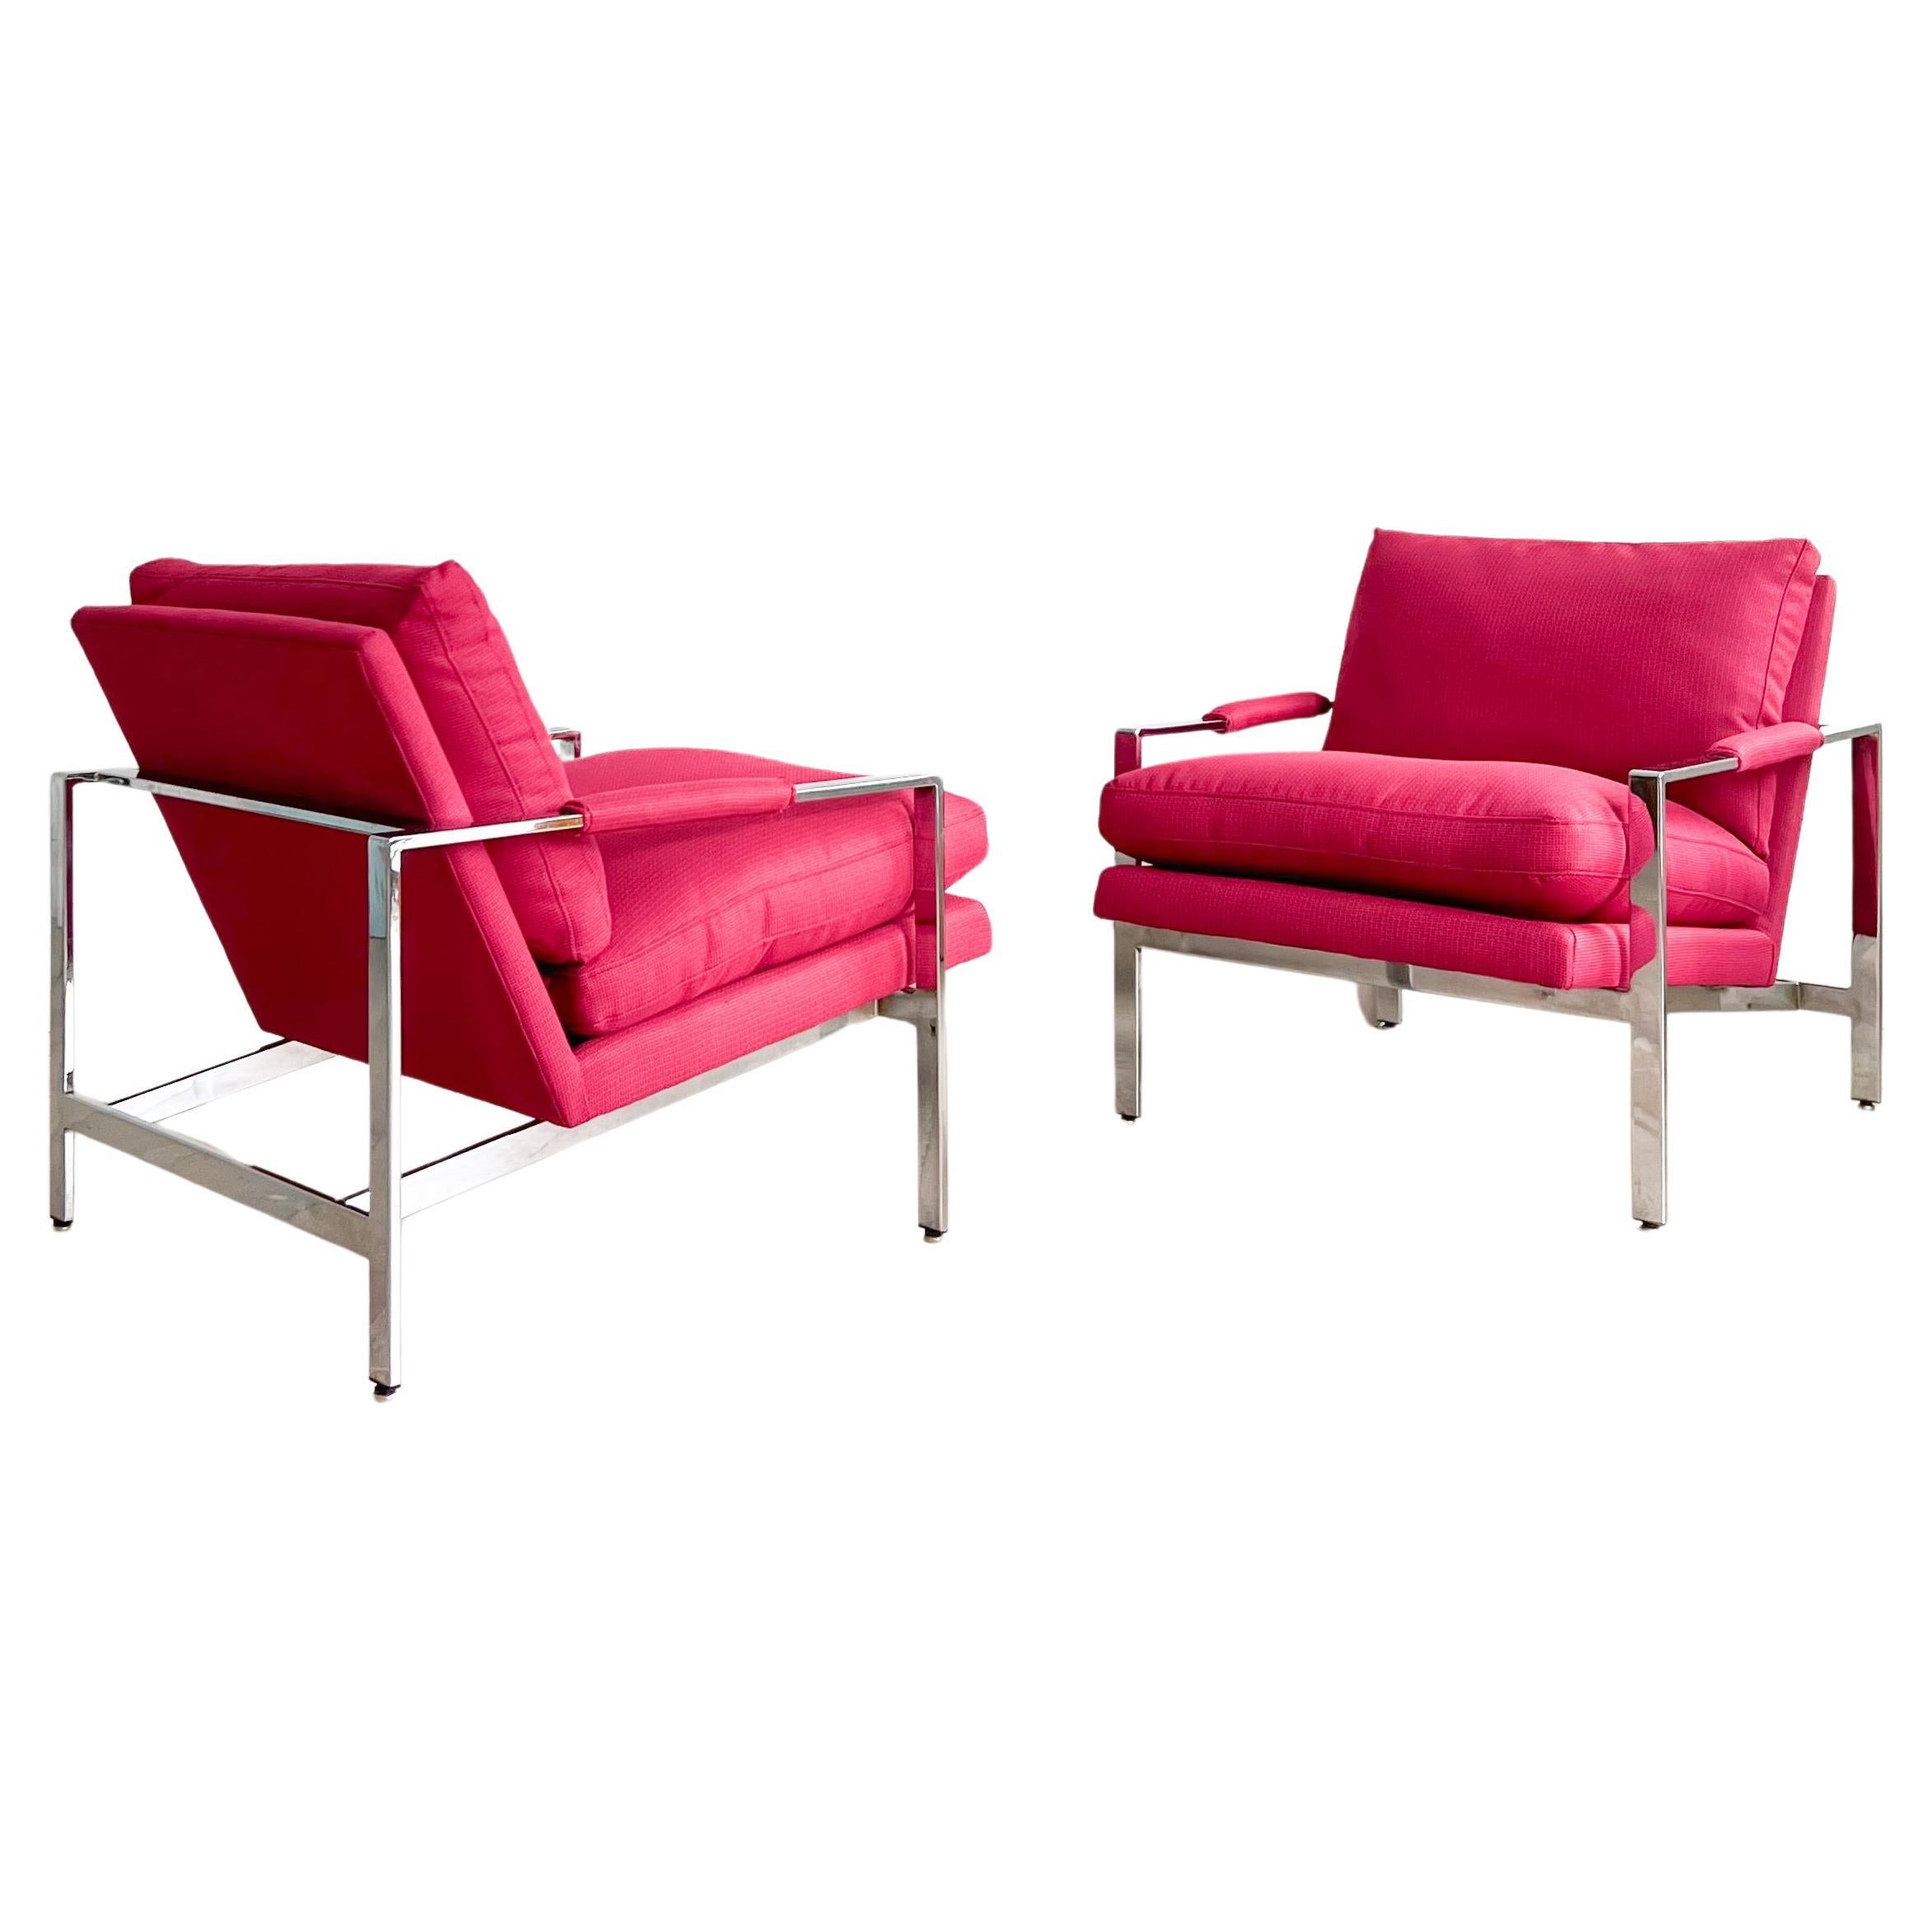 Pair Mid Century Modern Chrome Lounge Chairs by Milo Baughman for Thayer Coggin